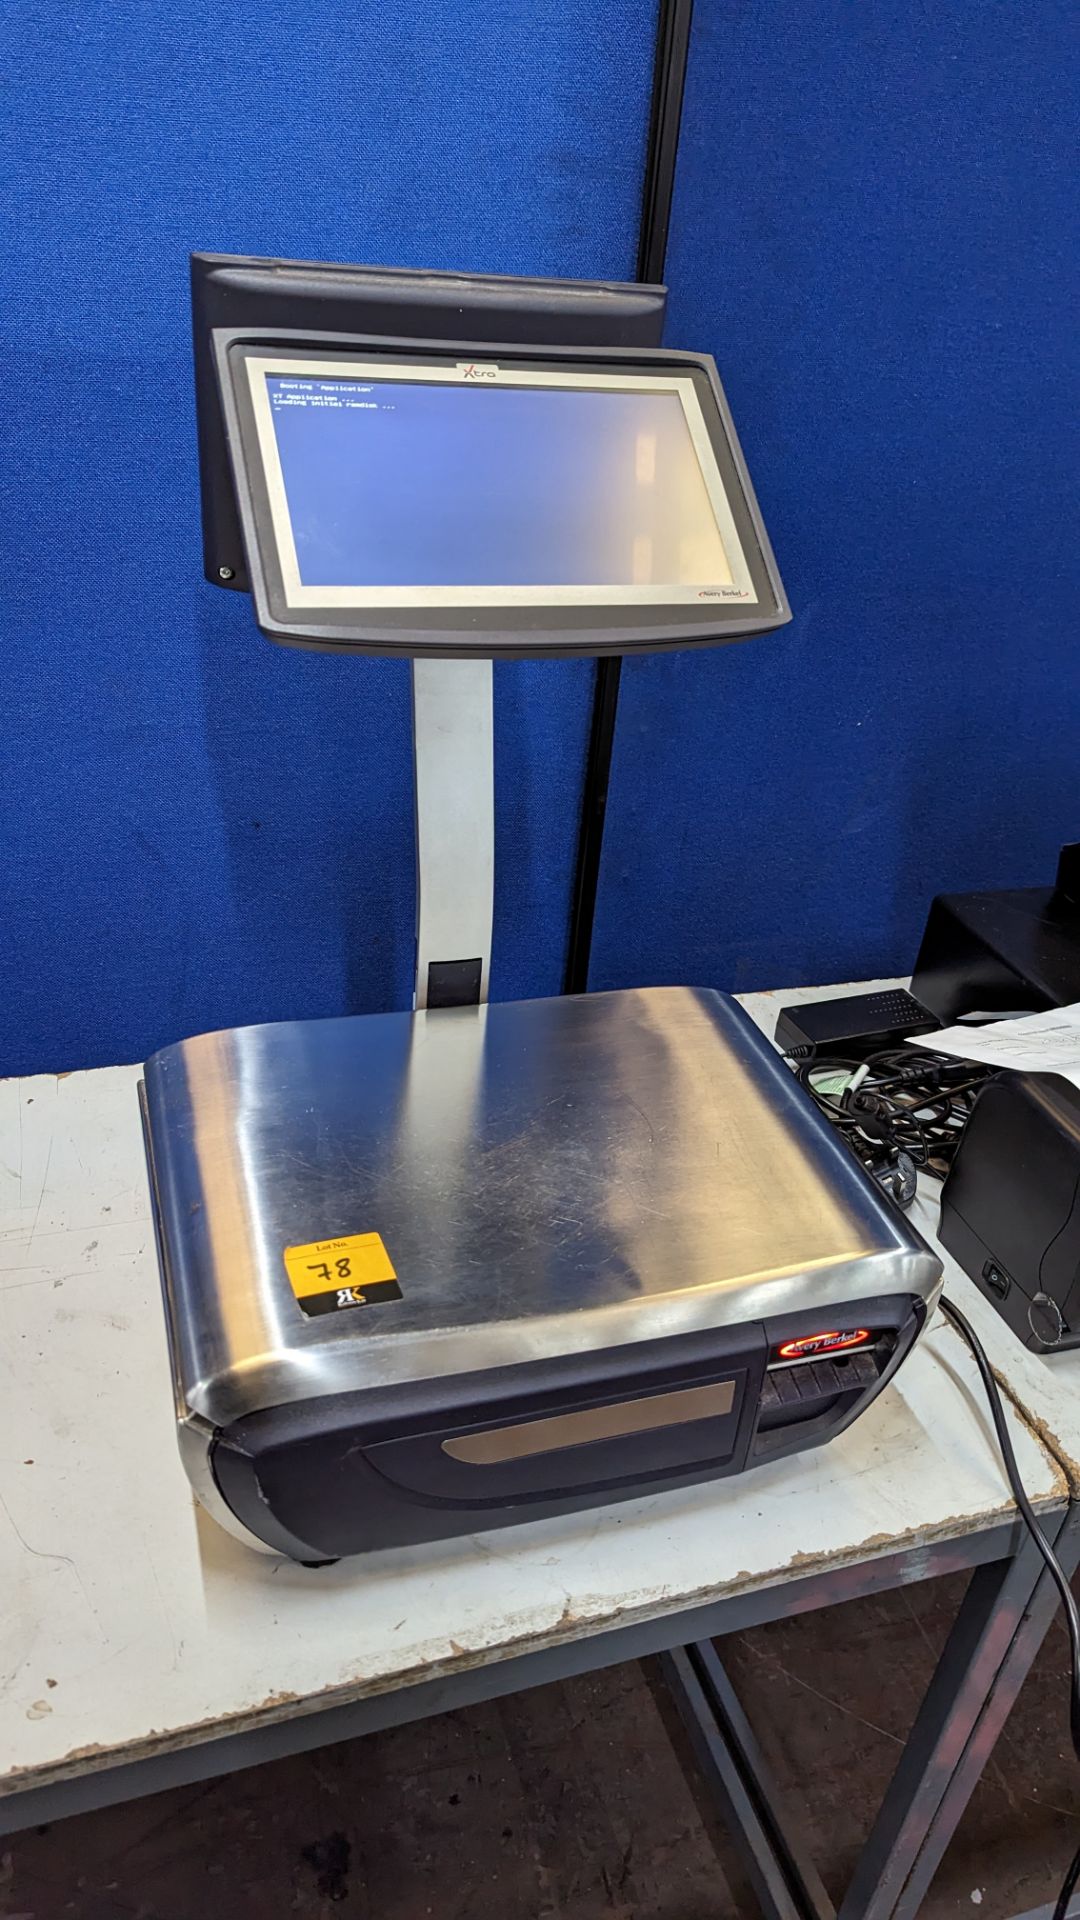 Avery Berkel Xti 400 Label & Receipt printing scale, 6kg/15kg capacity. These scales include a 10" - Image 4 of 16